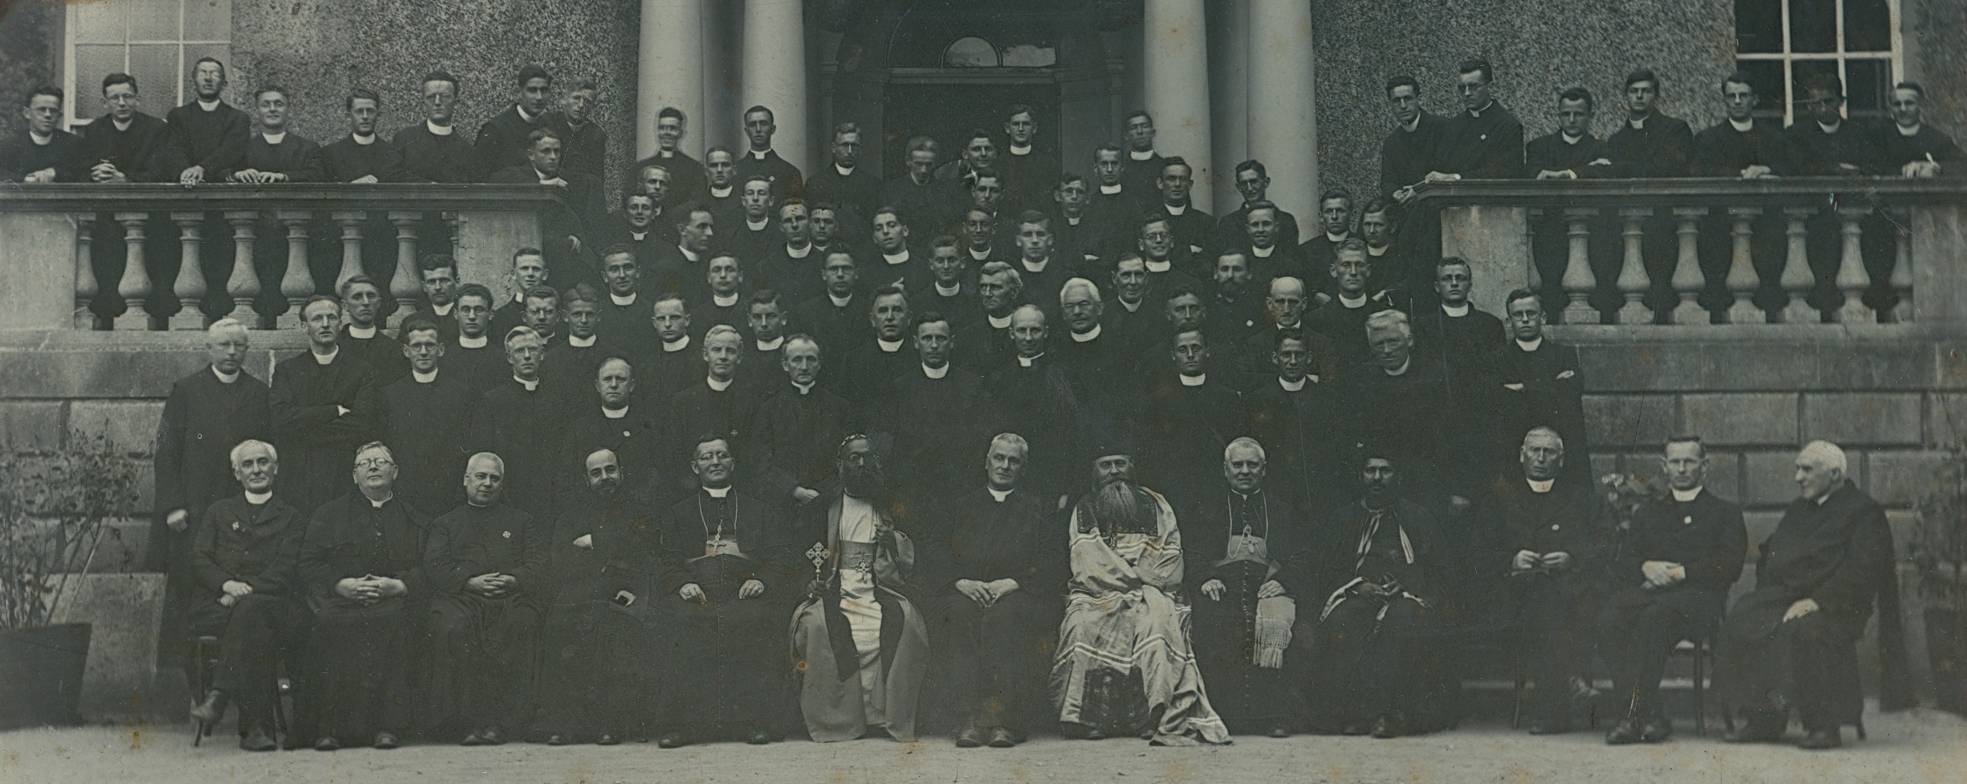 Jesuit community at Rathfarnham Castle, 1932 The Jesuit commnuity at Rathfarnham Castle on the occasion of the International Eucharistic Congress. Includes: Fr. T.V. Nolan SJ (Rector) and Irish Jesuits resident at Rathfarnham with guests; Mar Ivanios, Archbishop of Trivandrum, India; Bucys, Bishop of Olympus; Broderick, Bishop Peduelli; Trurita y Alumandos, Bishop of Barcelona; Rector of the Armenian Mission in Paris and Fr. Griffith, Vancouver. Rev. D.D. Ivanios and Bucys celebrated massess according to their respective Eastern rites in the chapel at Rathfarnham. FM/RATH/71. Courtesy of the Irish Jesuit Archive. 